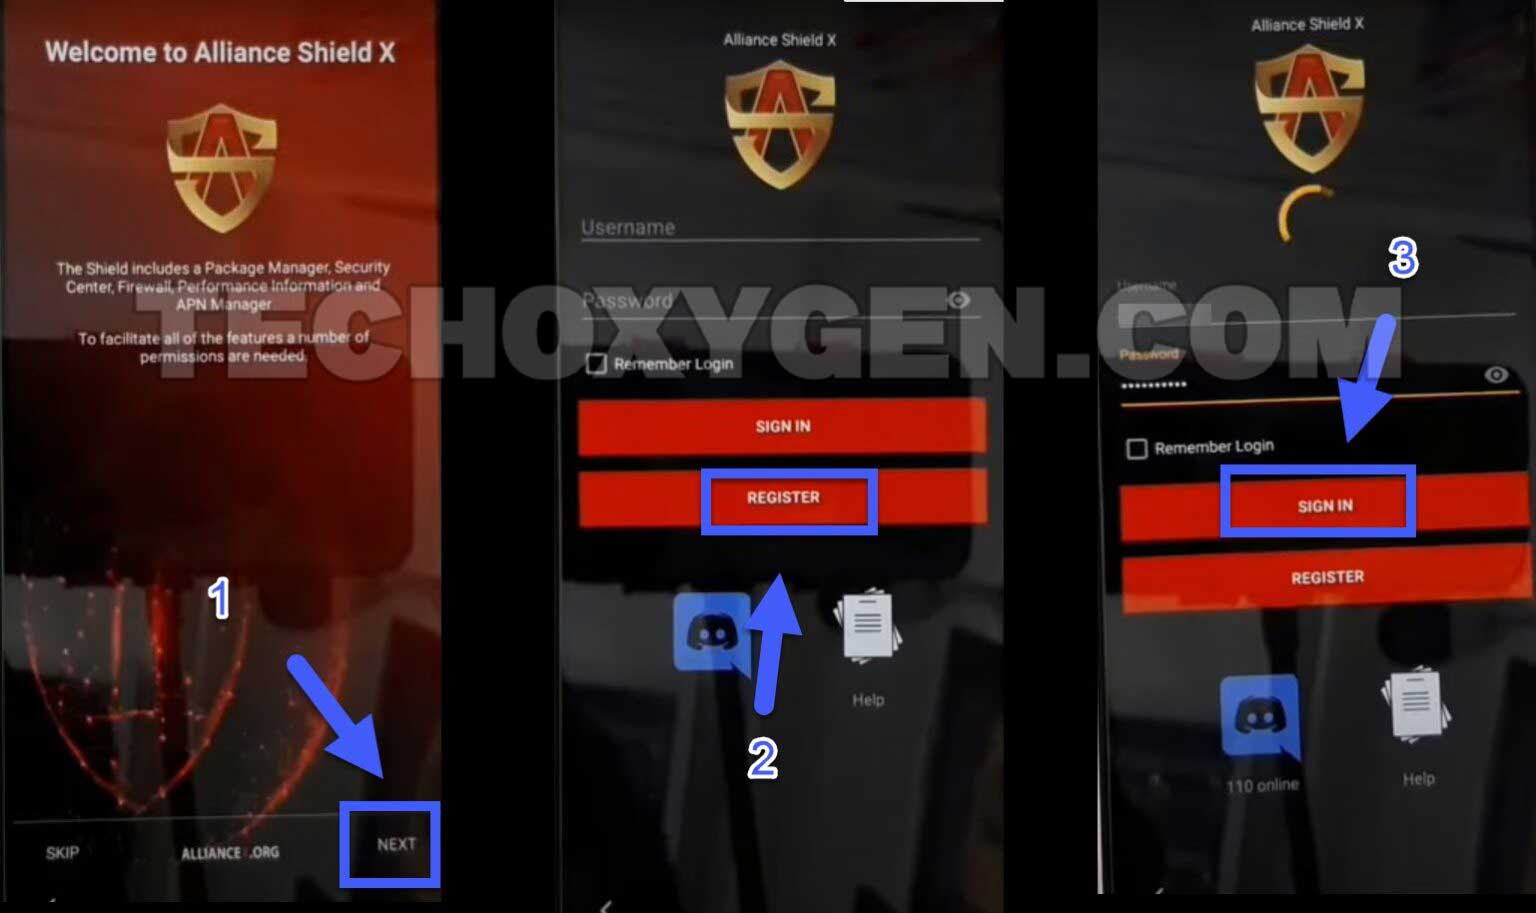 Create Alliance Shield x Account Frp Bypass Android 11/12 2022